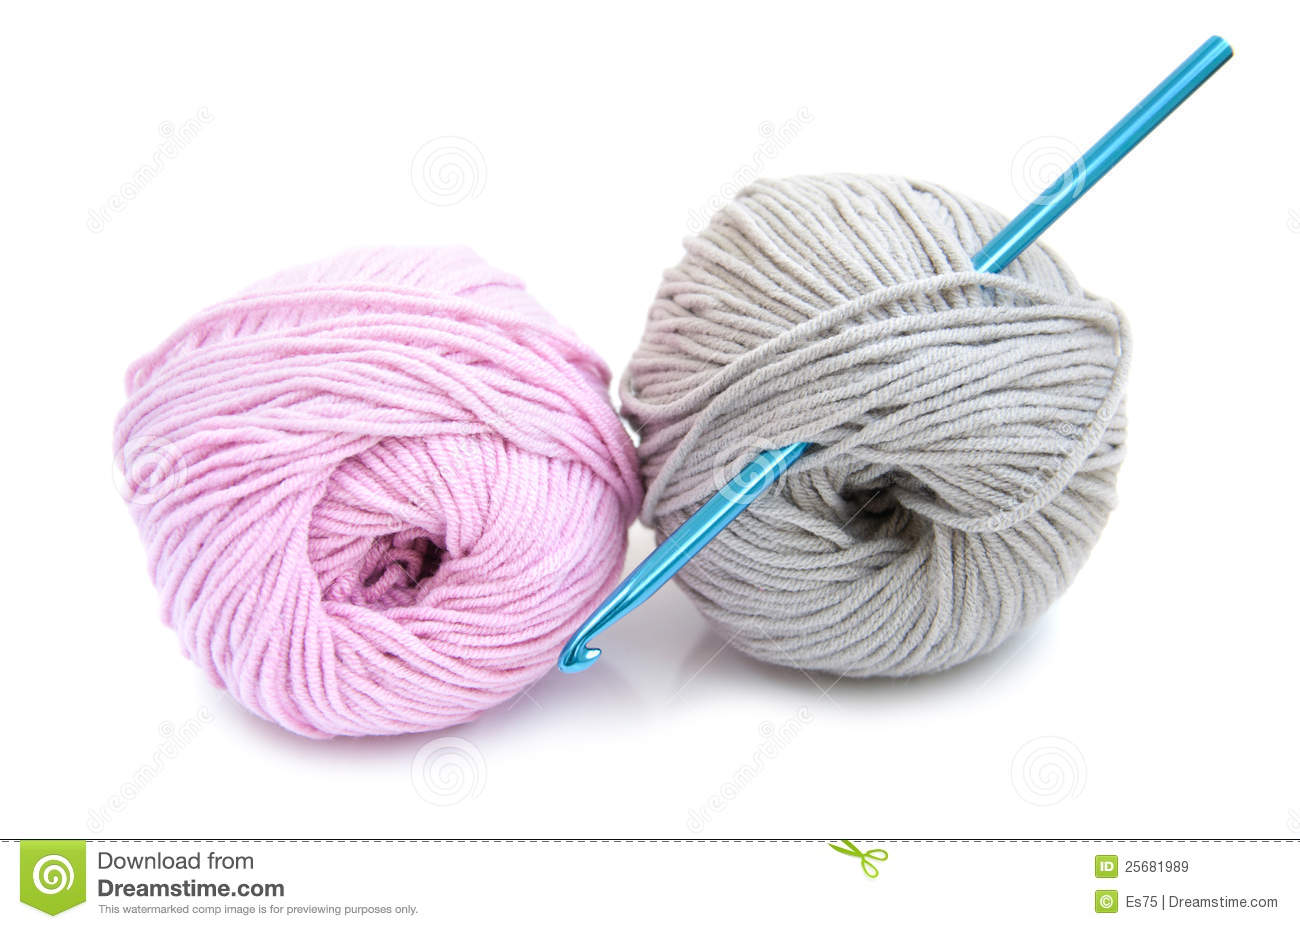 Crochet Hook And Yarn Royalty Free Stock Images   Image  25681989